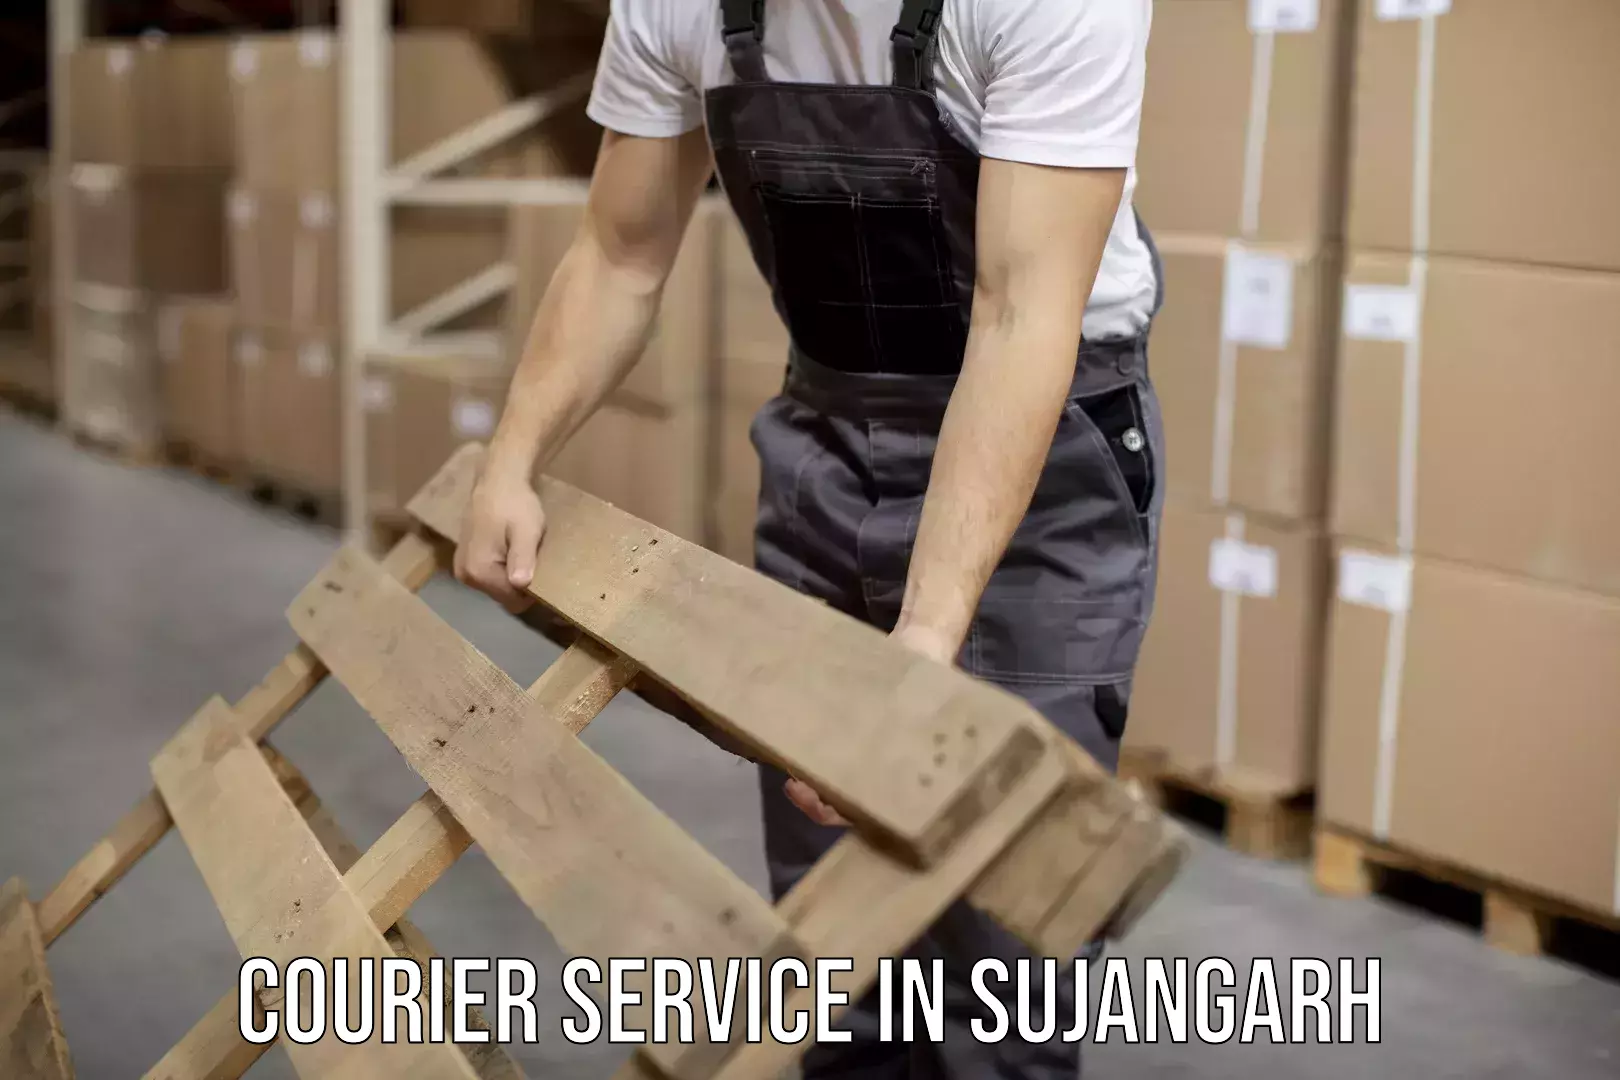 Next-generation courier services in Sujangarh